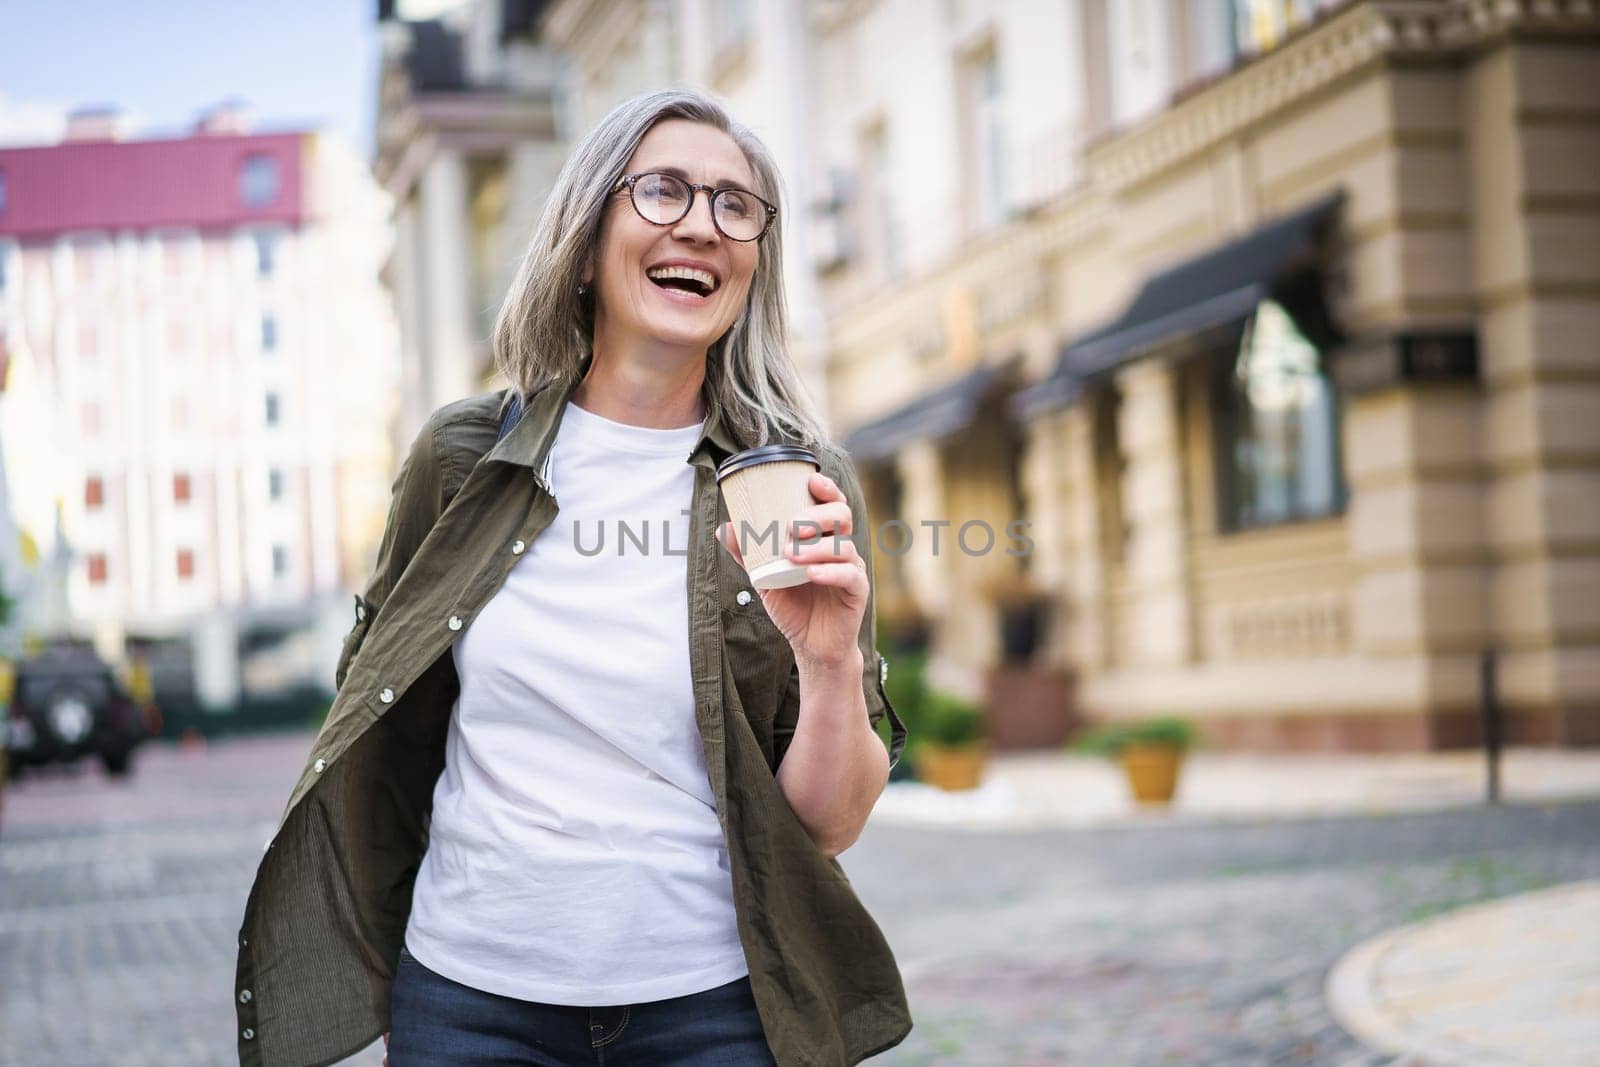 Stylish senior woman with grey hair holding coffee cup while enjoying vibrant atmosphere of European city. Colorful cityscape and architectural landmarks create timeless and classic background that highlights beauty, grace, and dignity of aging.